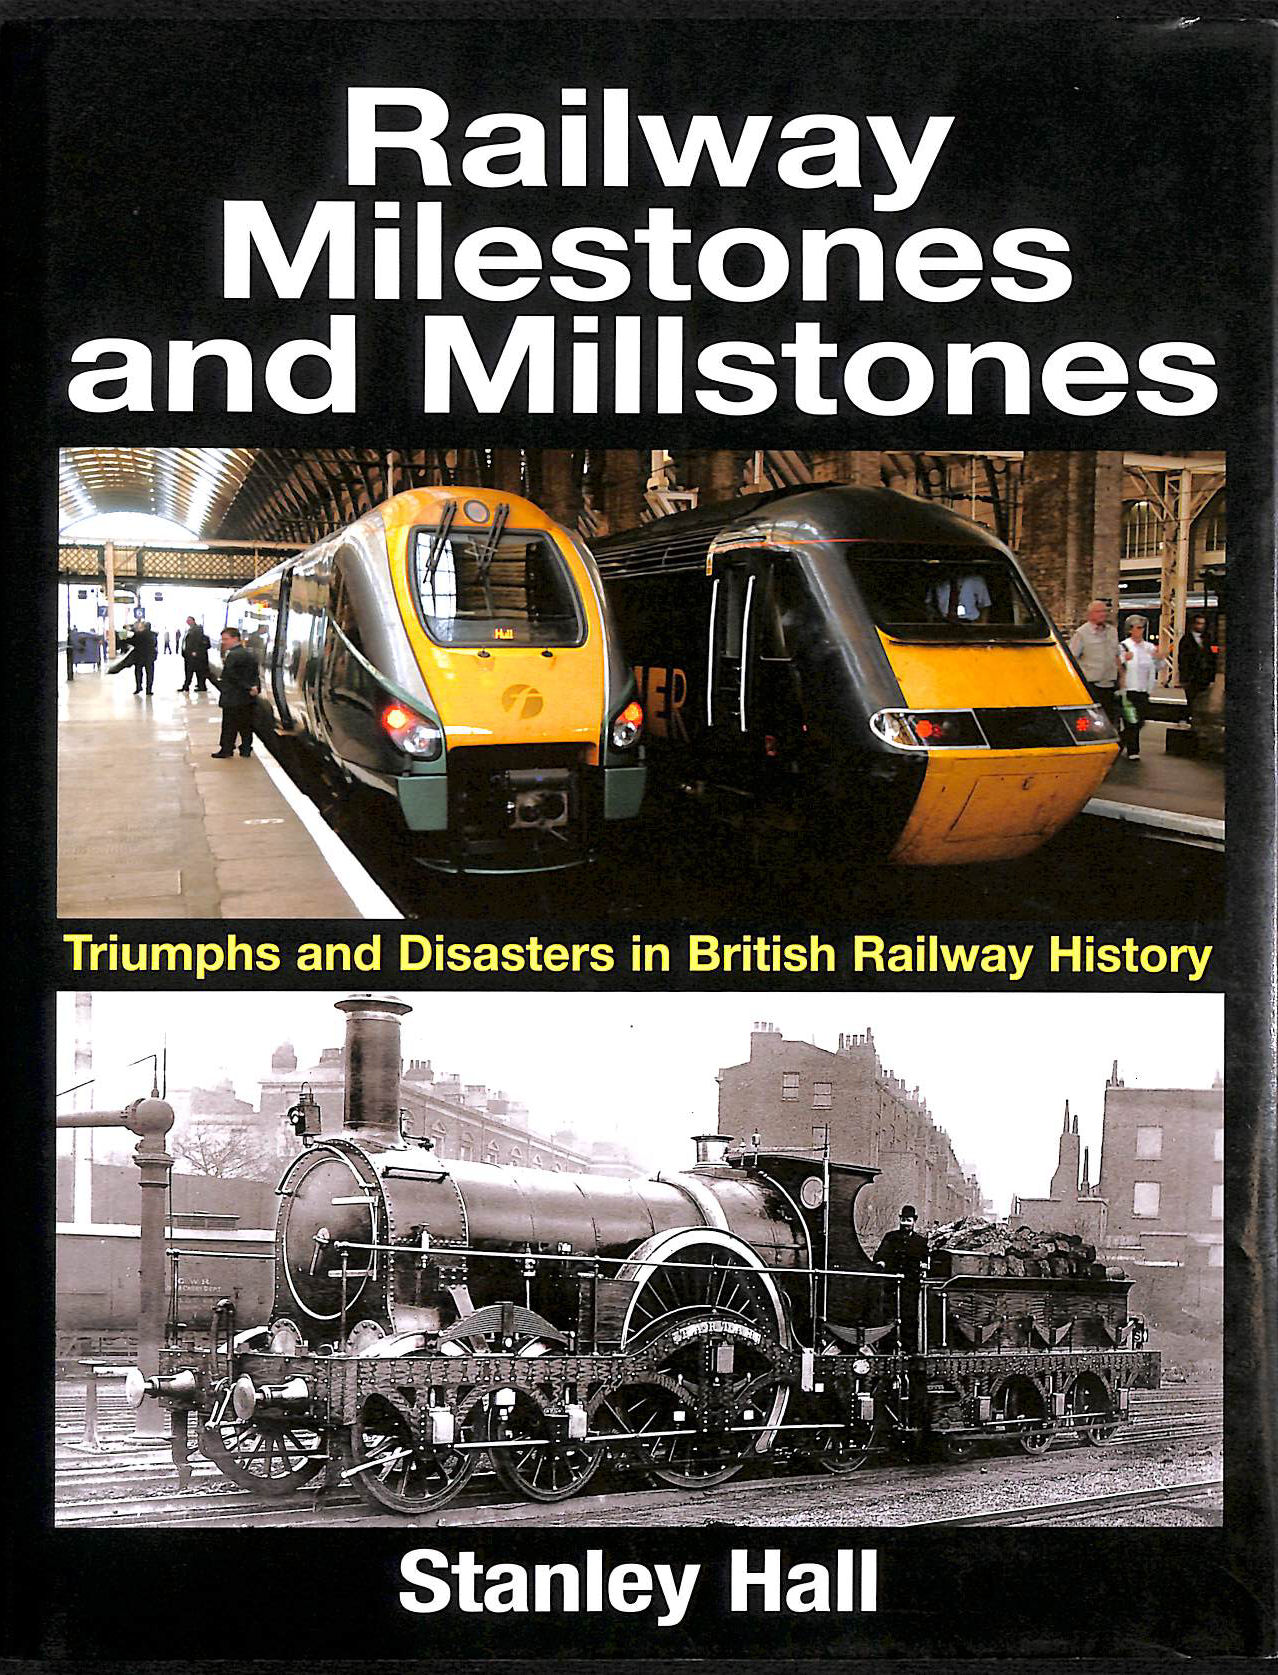 HALL, STANLEY - Railway Milestones and Millstone: Triumphs and Disasters in British Railway History